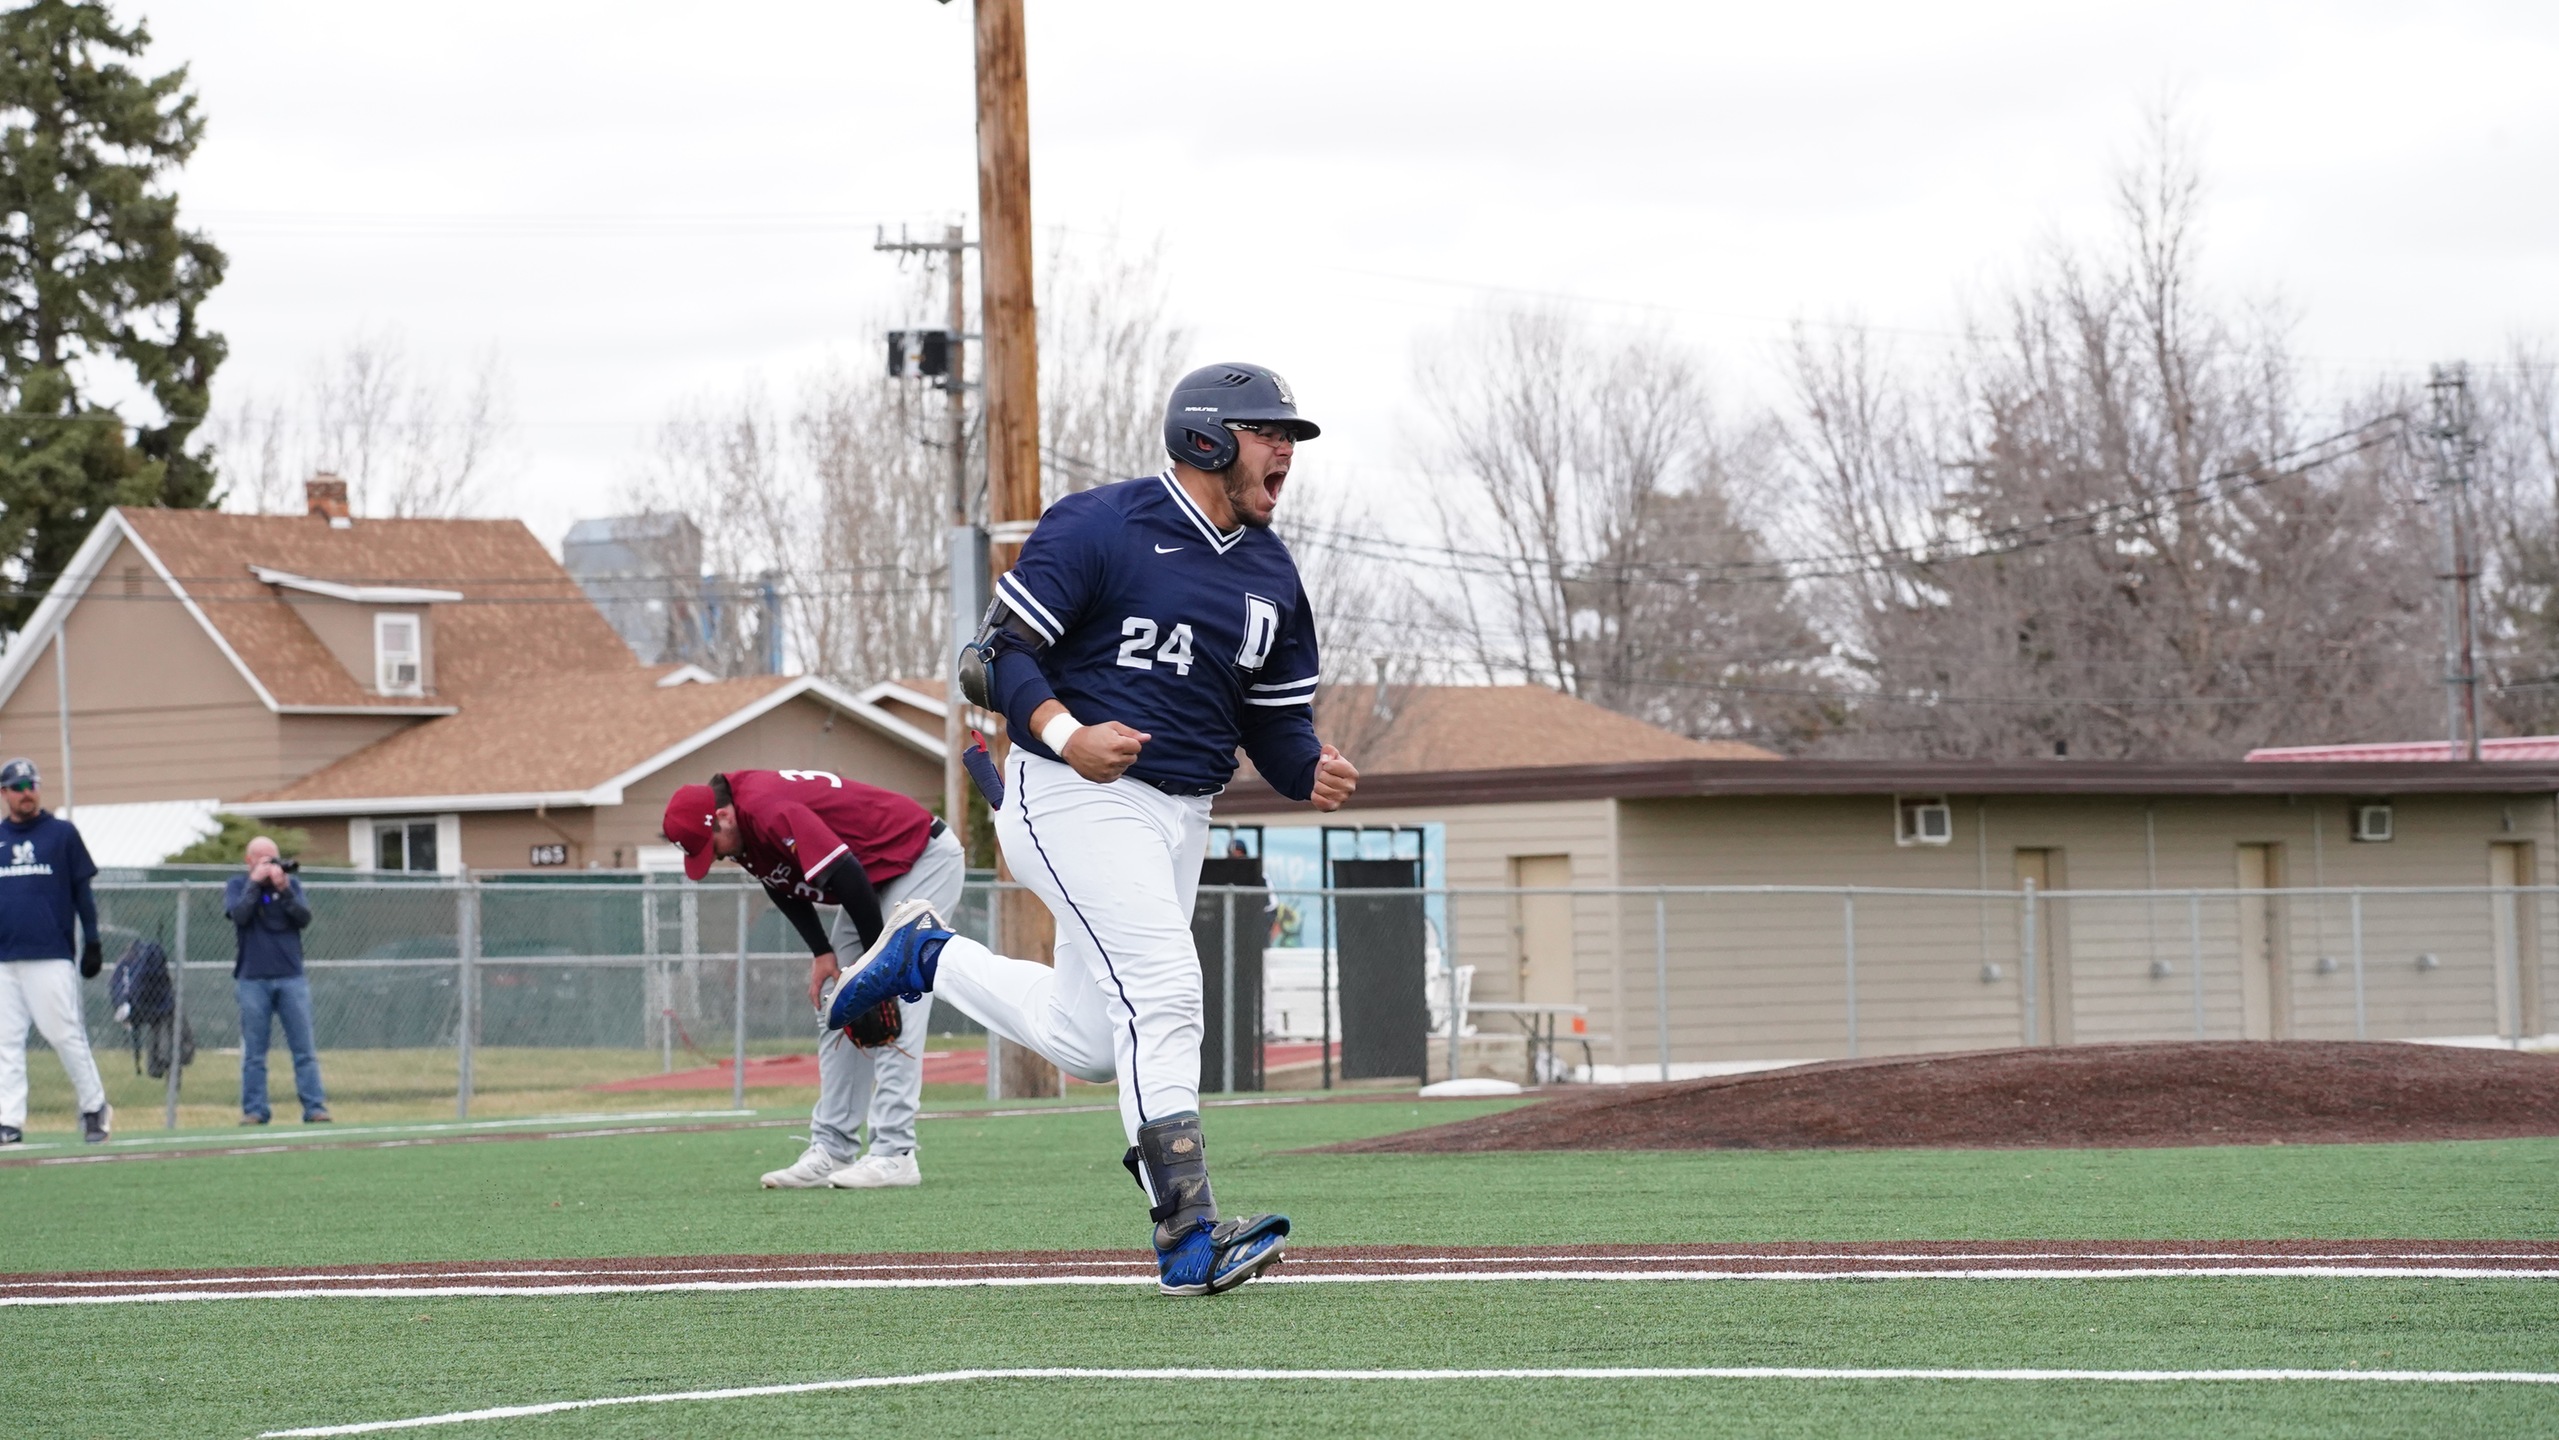 Blue Hawks use long ball to rout VCSU